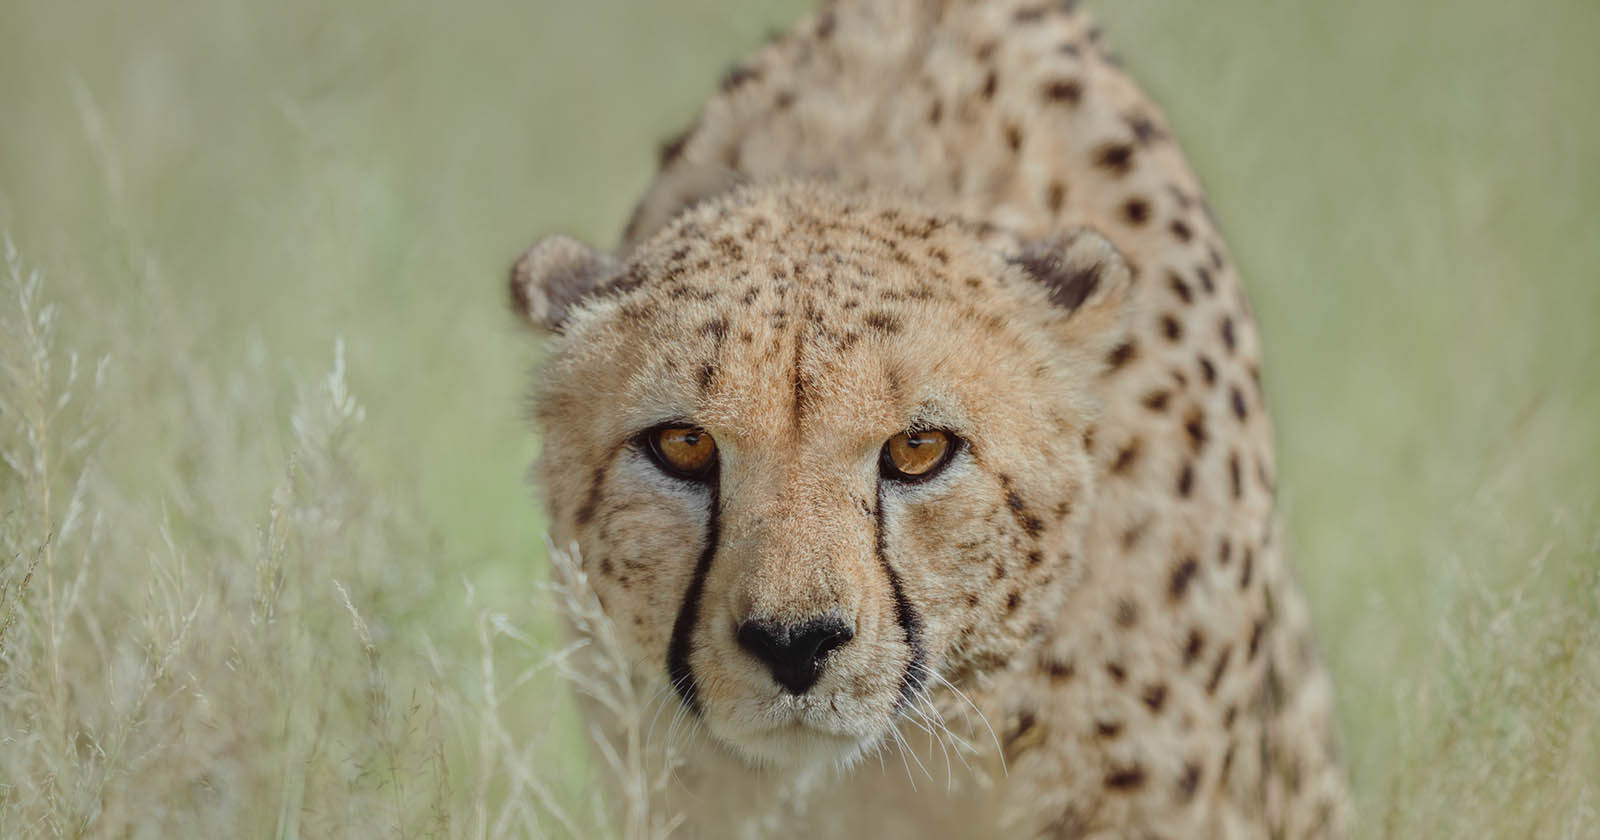 A Wildlife Photographer Turns His Lens on Cheetah Conservation